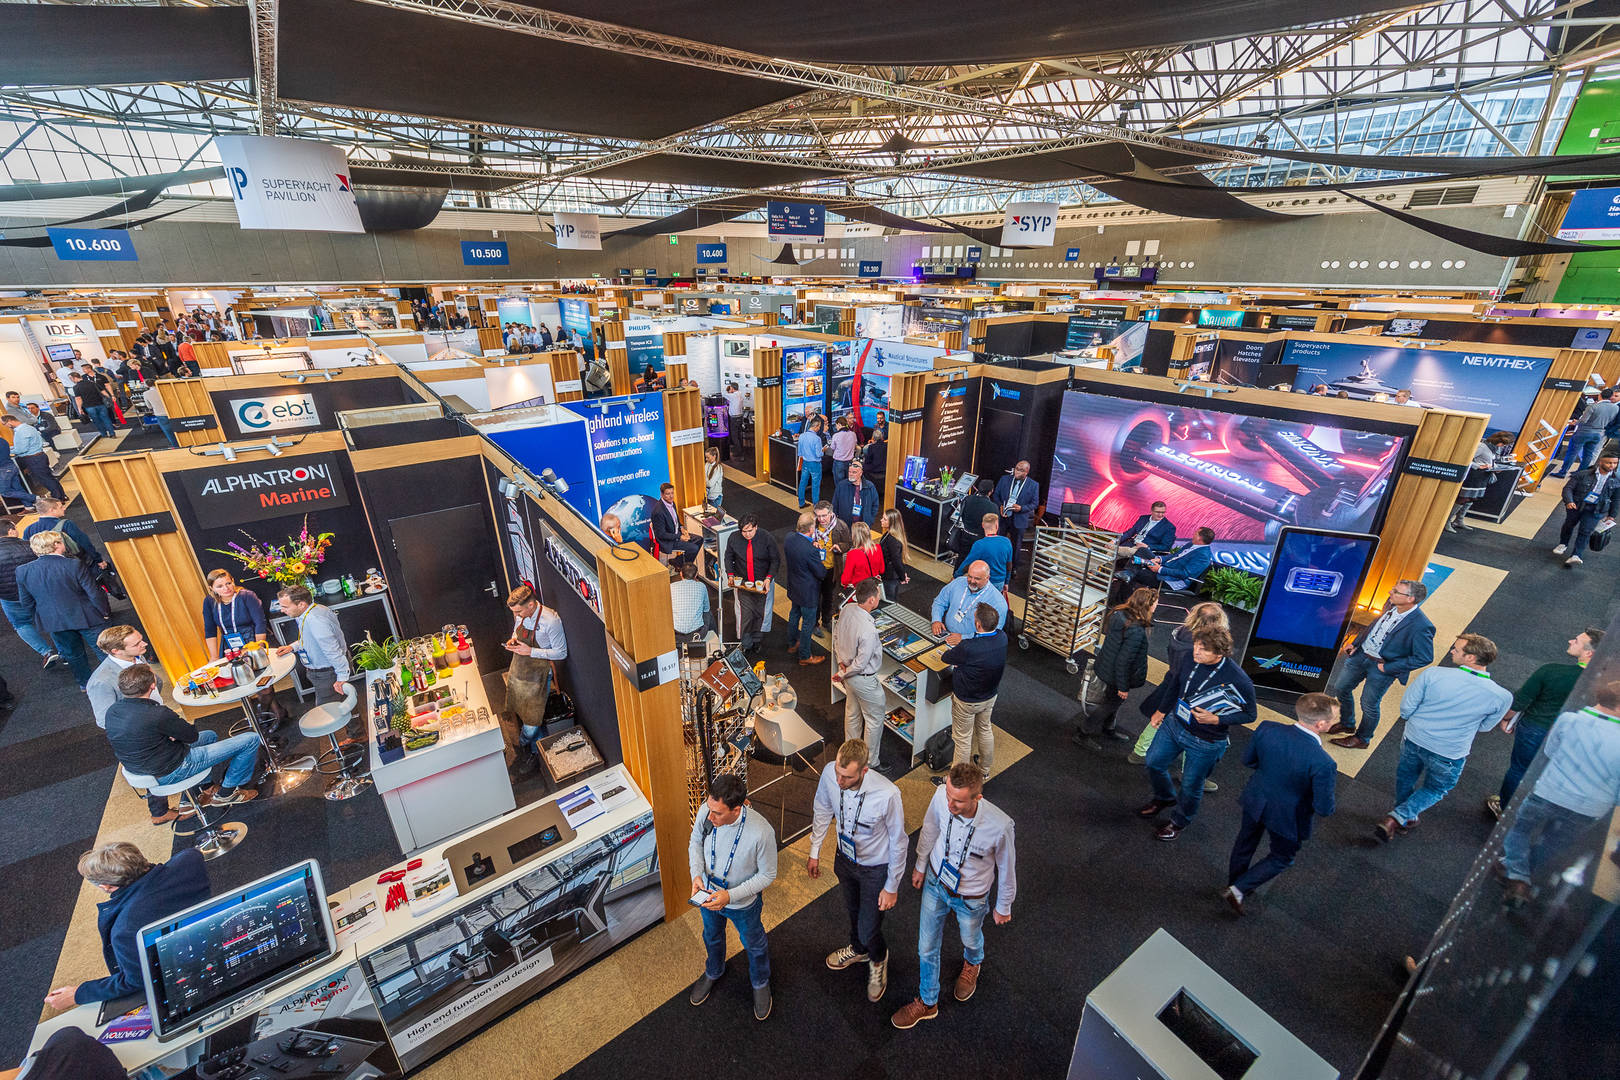 Aerial shot of the Metstrade exhibition hall